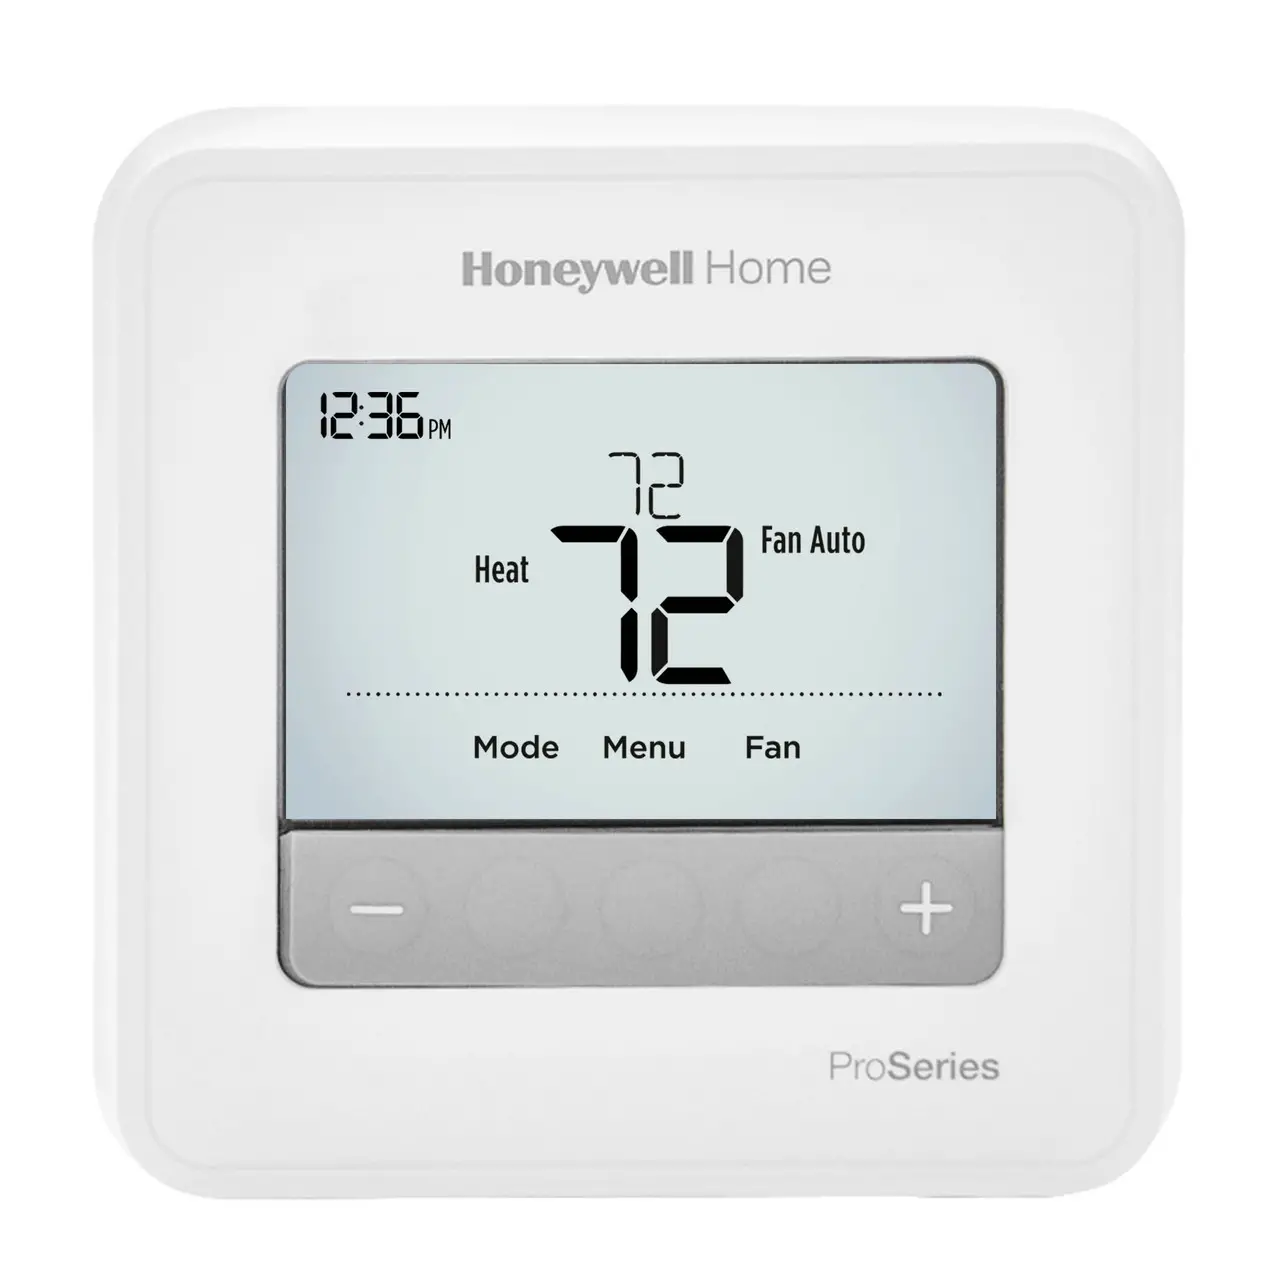 Honeywell Home T4 Pro Thermostat User Manual - Manualsee